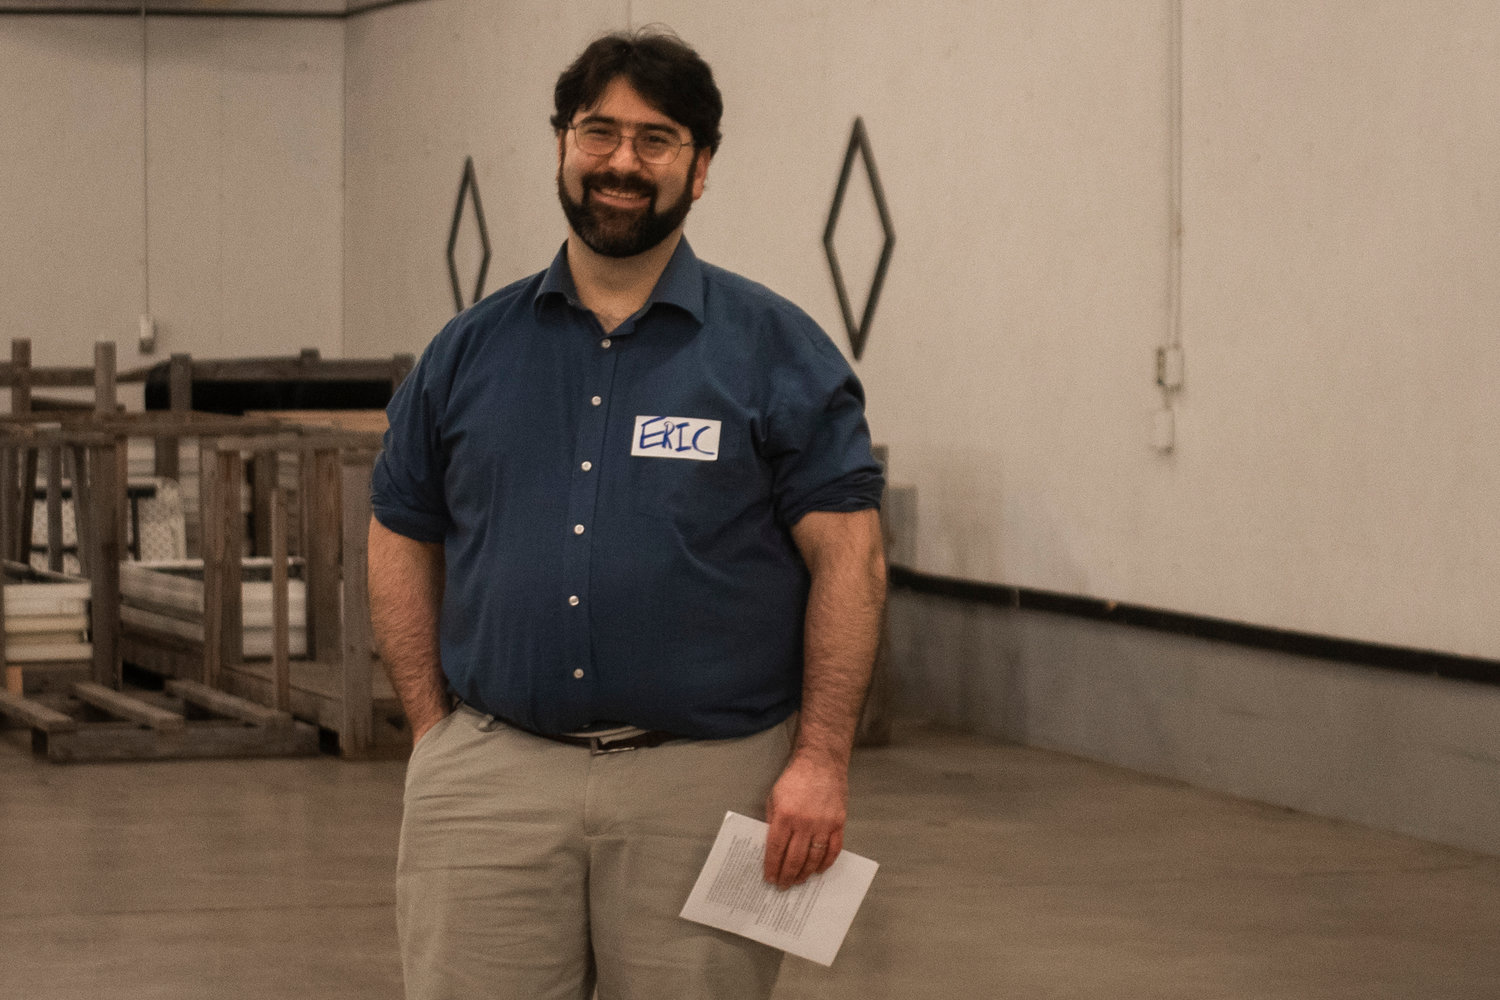 Lewis County Special Projects Deputy Prosecuting Attorney Eric Eisenberg smiles for a picture at a facilitated public forum on a proposed night-by-night shelter in Lewis County on Thursday night at the Southwest Washington Fairgrounds.